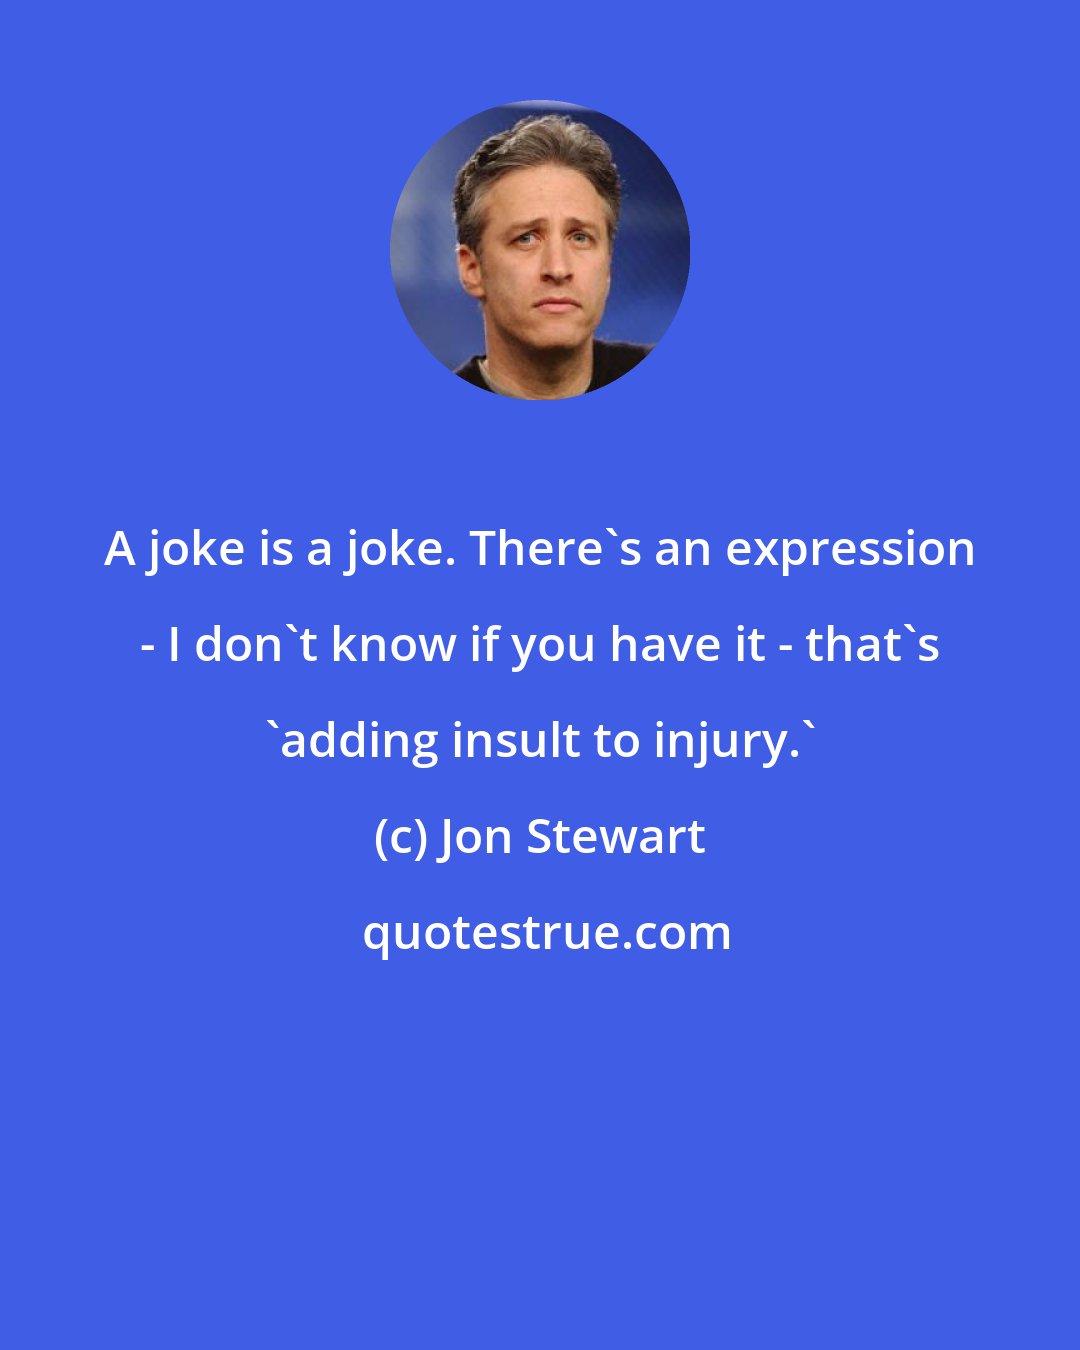 Jon Stewart: A joke is a joke. There's an expression - I don't know if you have it - that's 'adding insult to injury.'